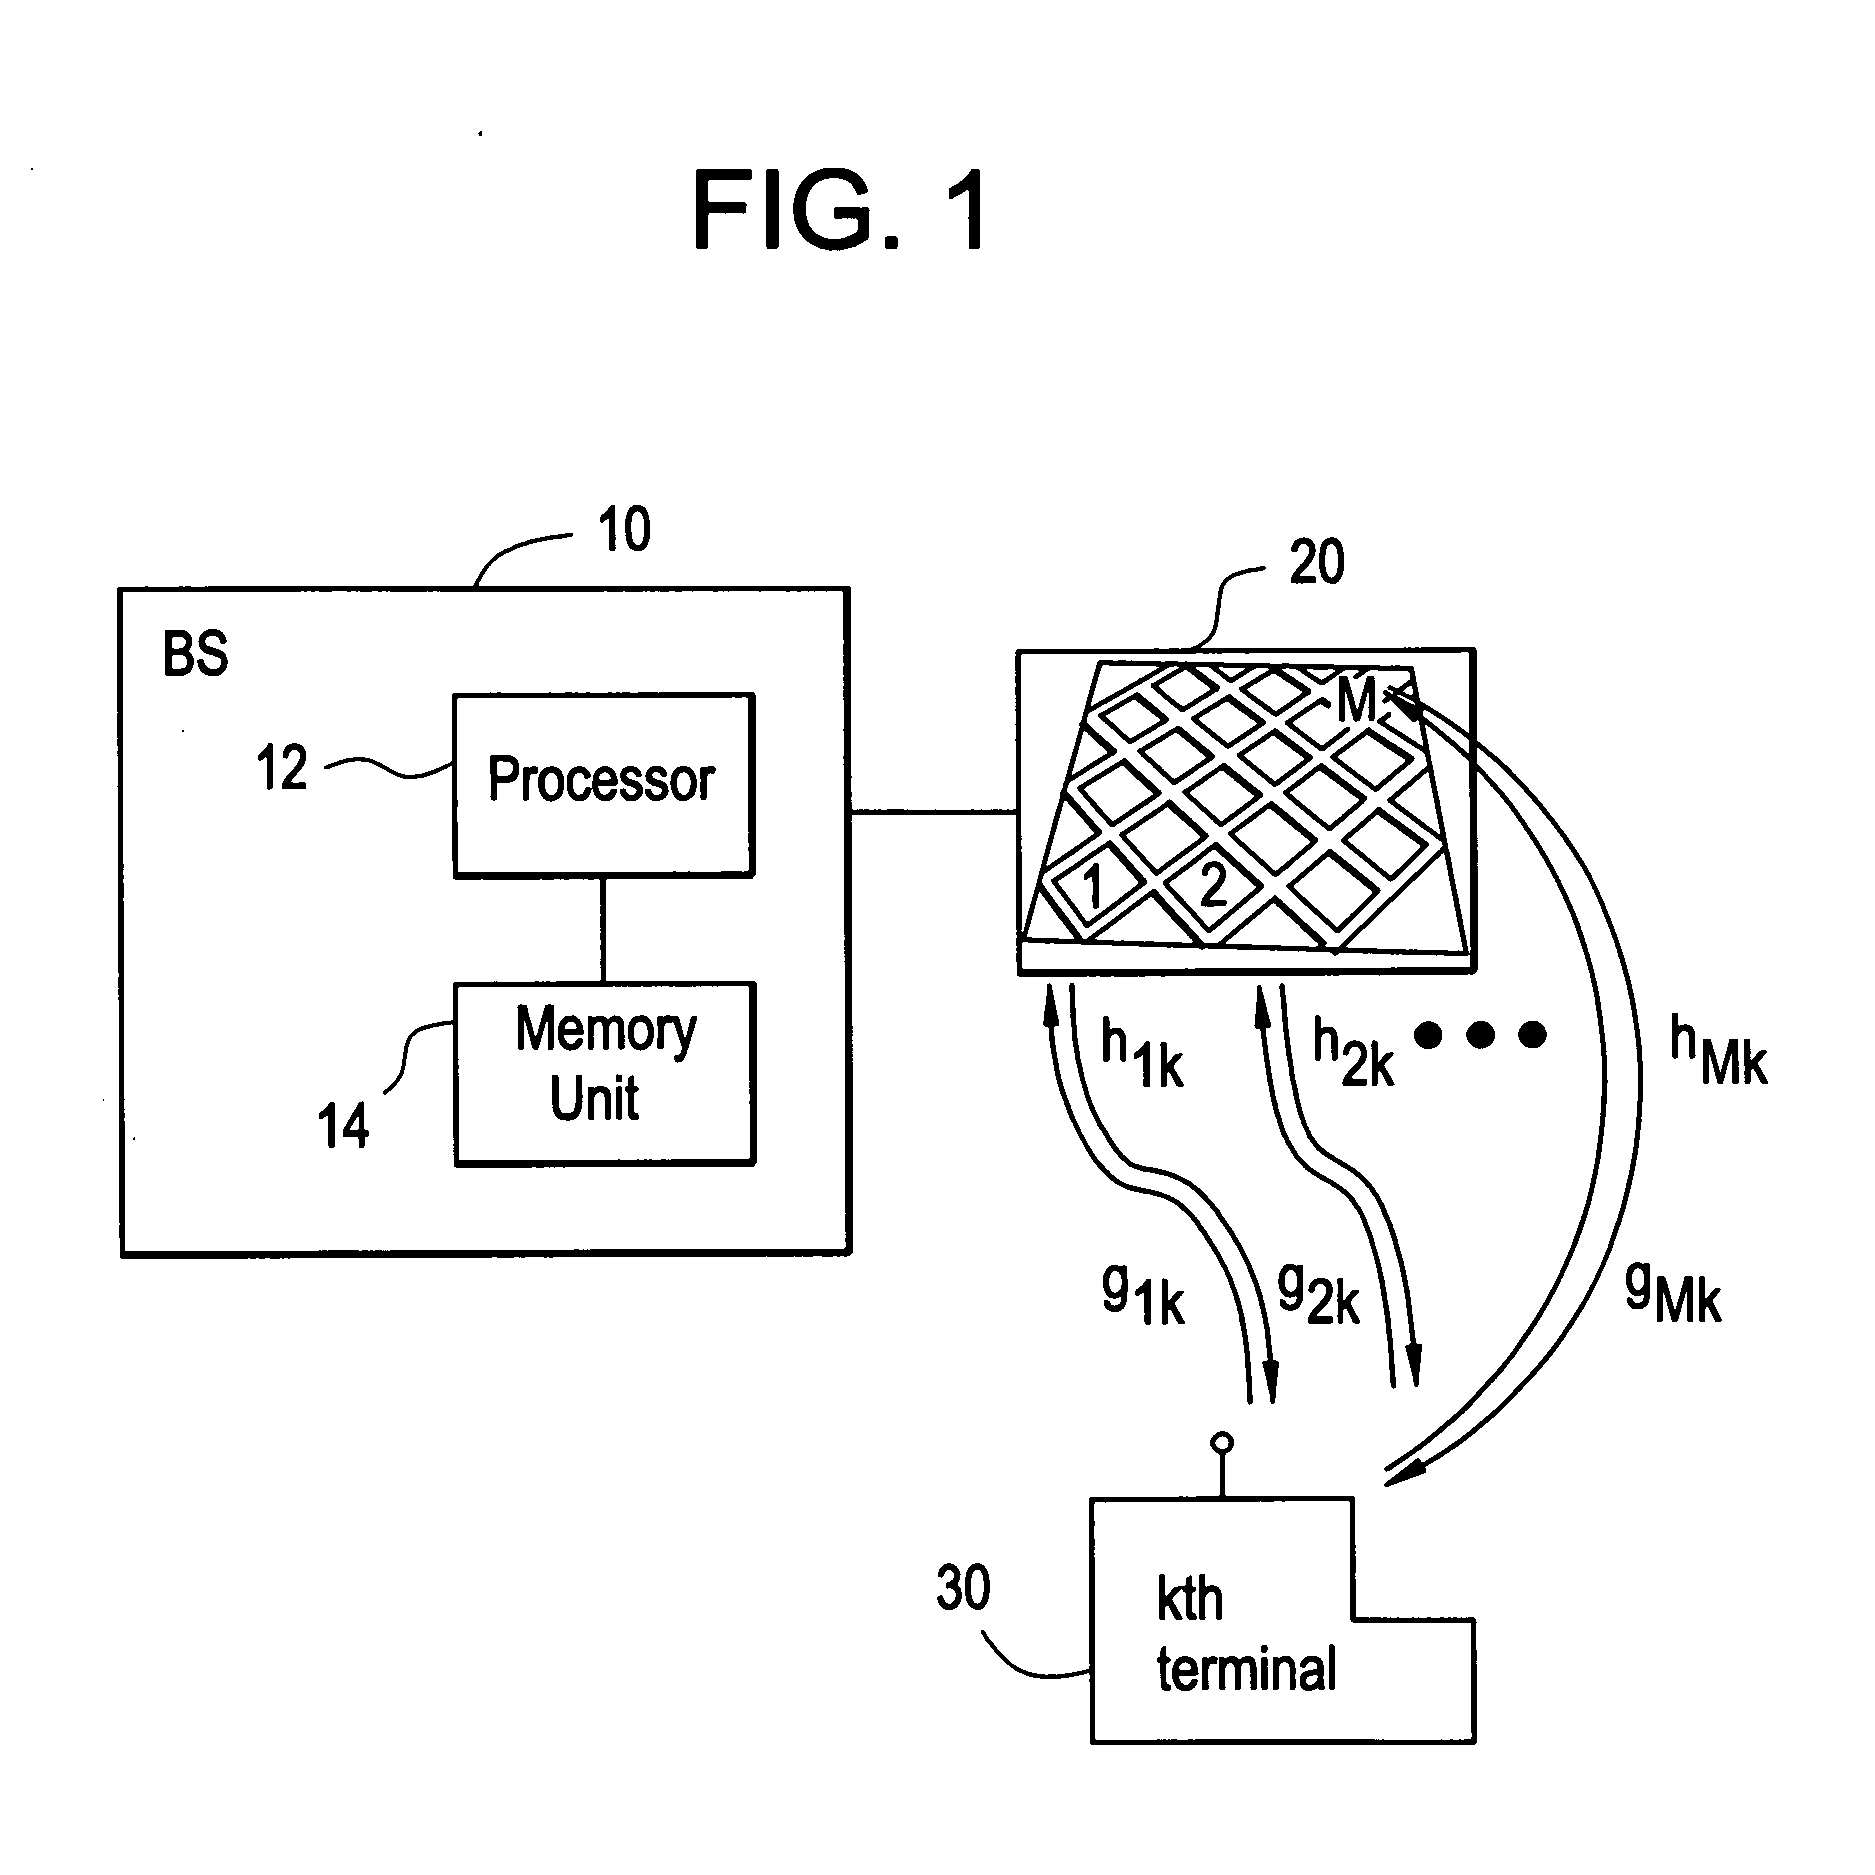 Method for beamforming transmissions from a network element having a plurality of antennas, and the network element